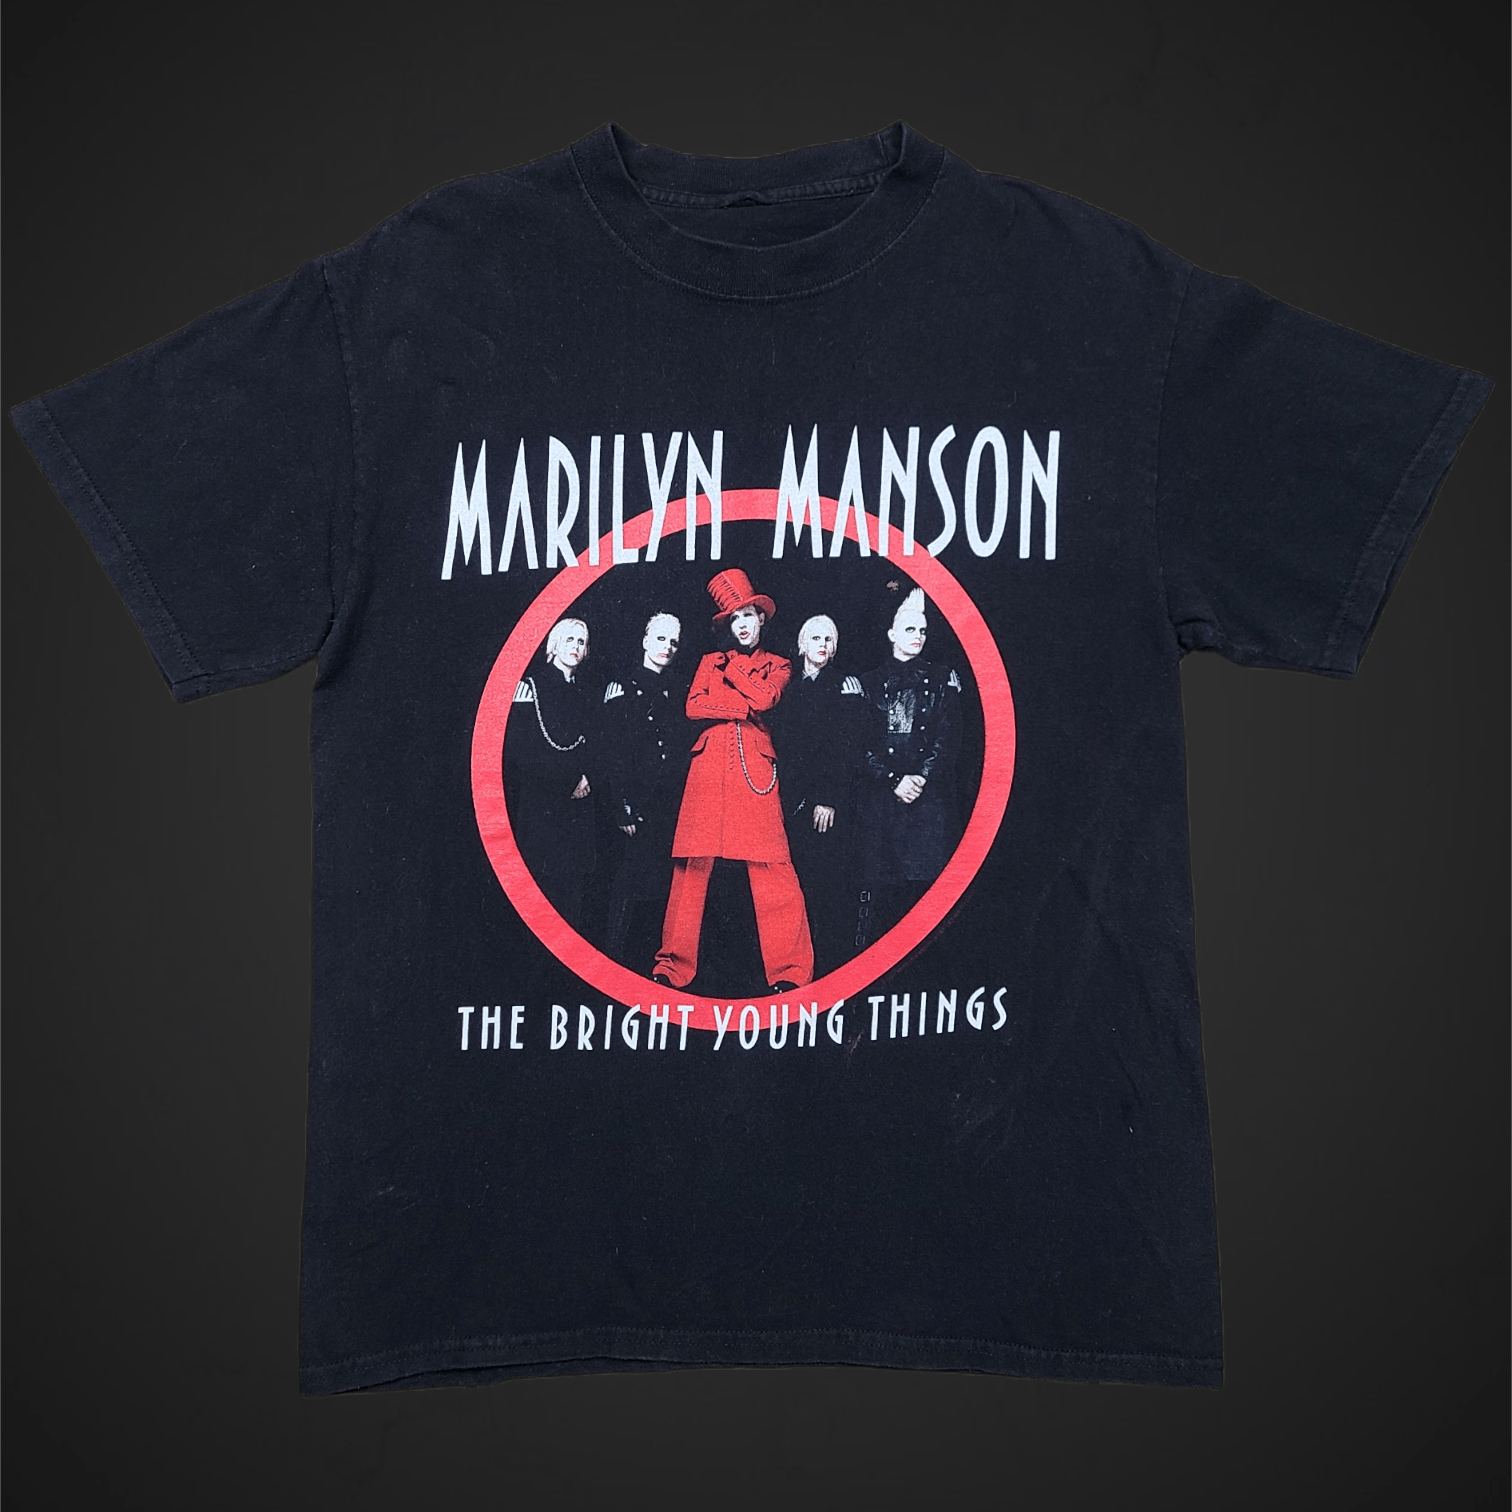 Vintage Vintage Marilyn Manson Band Tee Shirt Size US M / EU 48-50 / 2 - 1 Preview